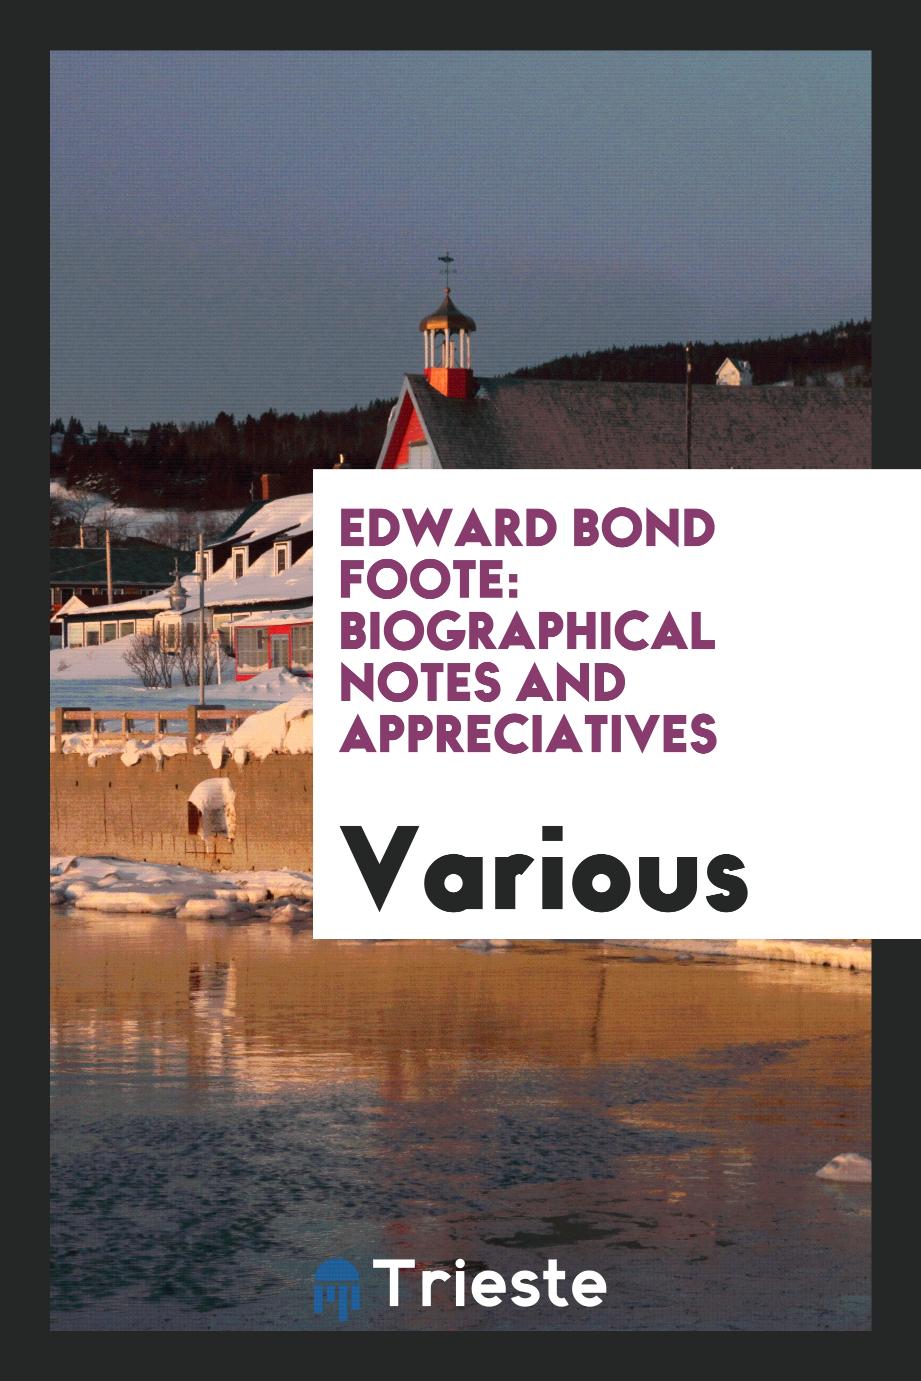 Edward Bond Foote: Biographical Notes and Appreciatives